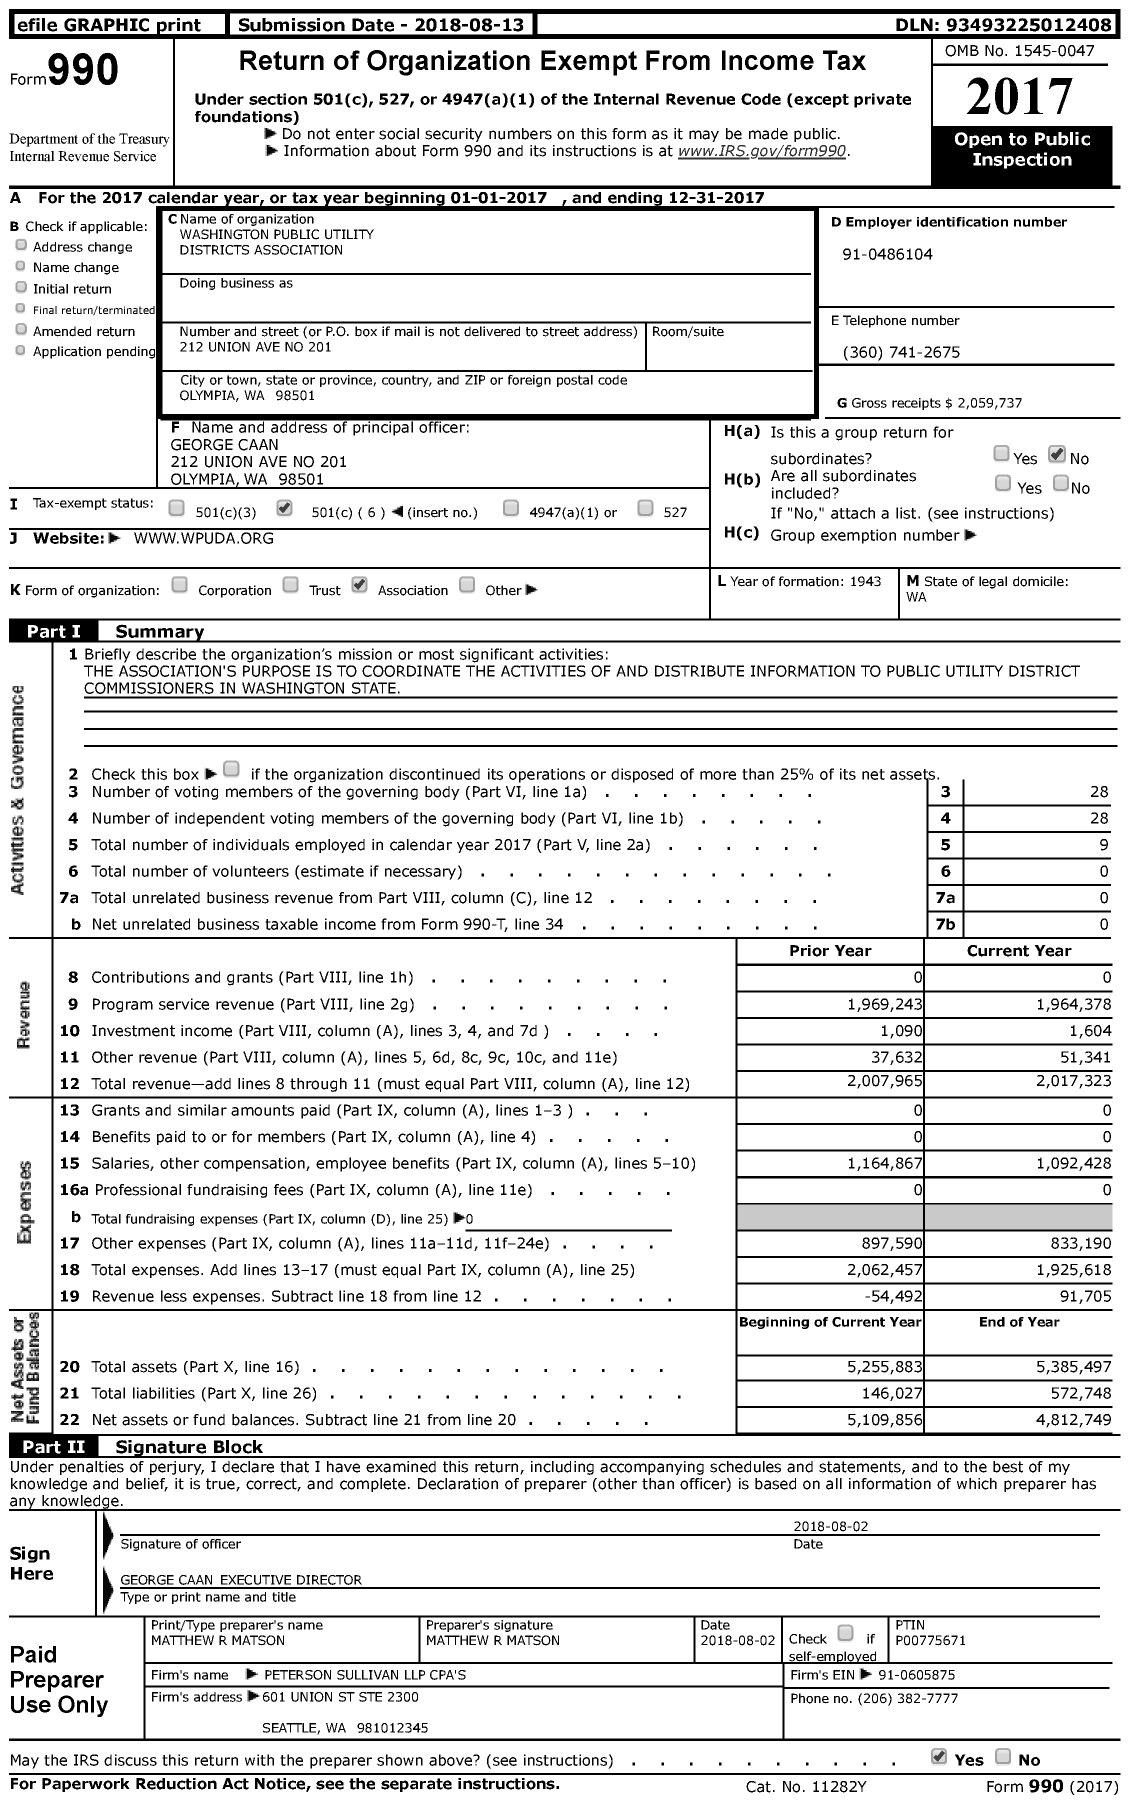 Image of first page of 2017 Form 990 for Washington Public Utility Districts Association (WPUDA)